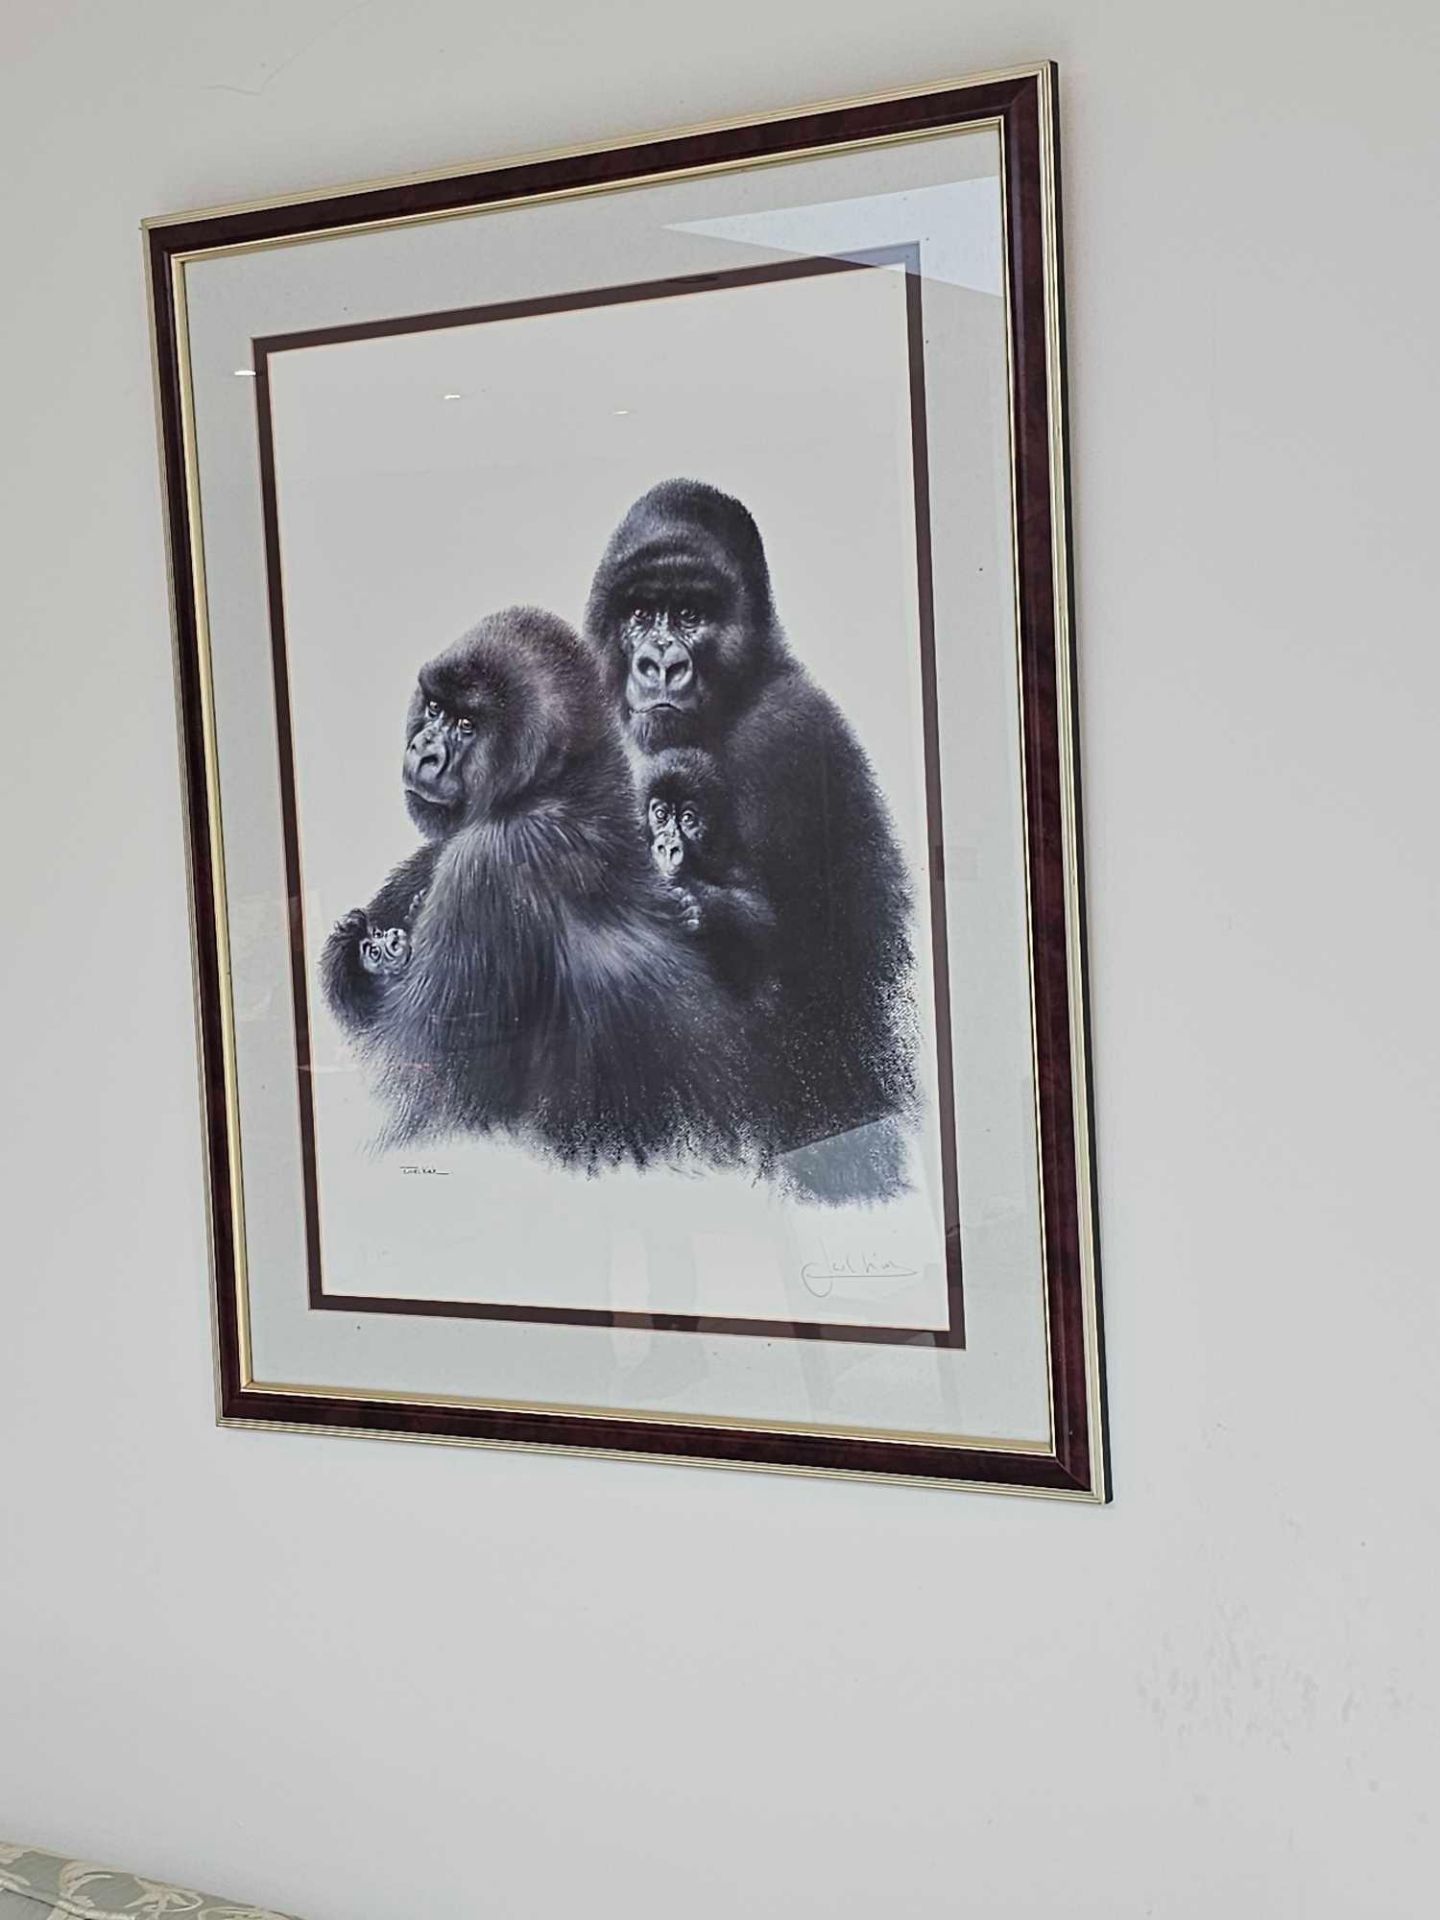 A Joel Kirk (British, Born 1948) Family Of Silver Back Gorillas, From A Limited Edition Series - Image 2 of 4